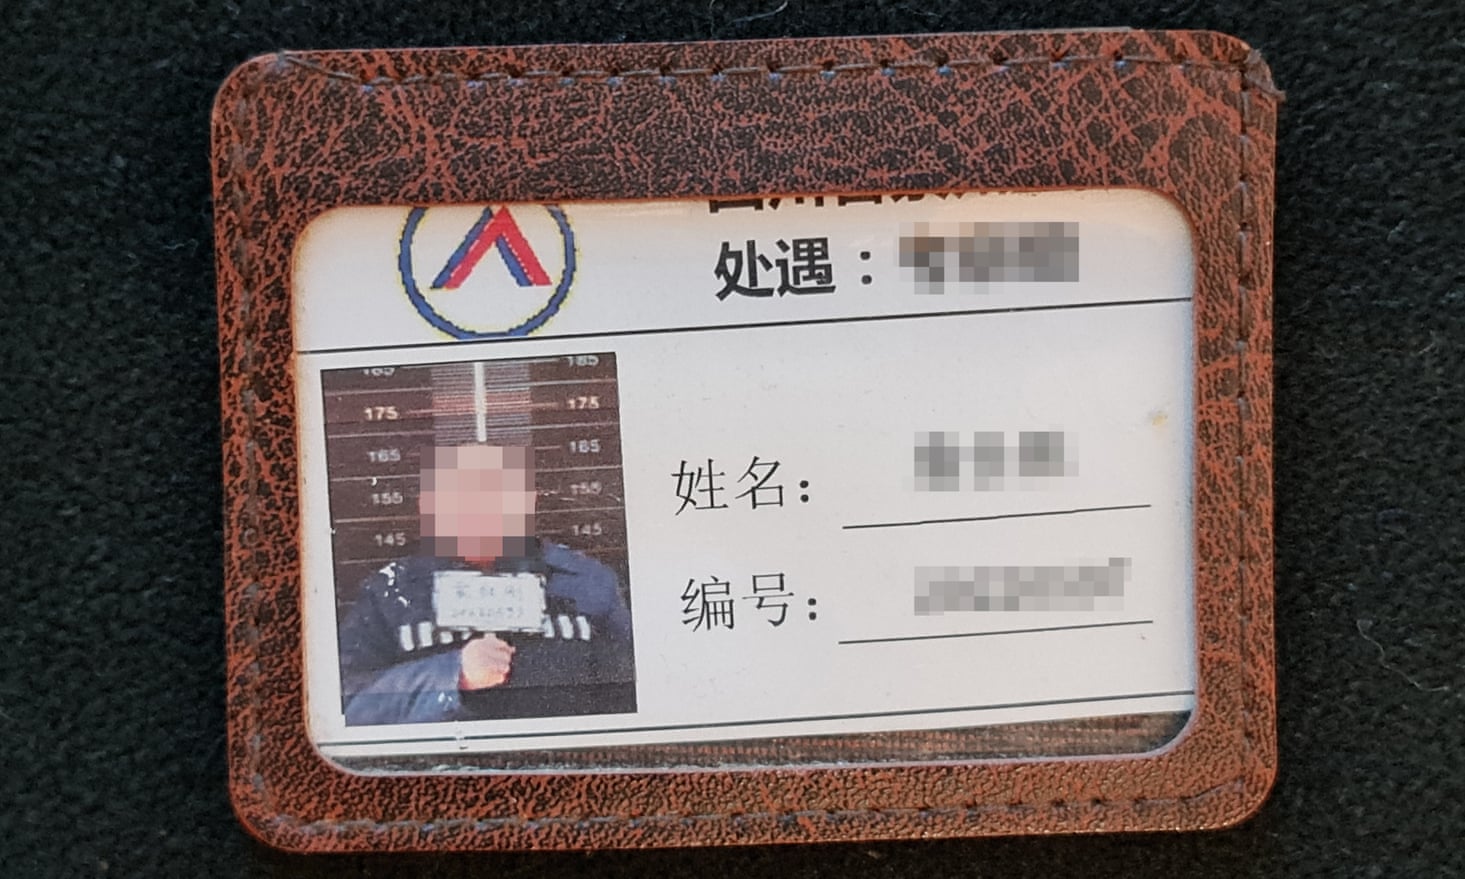 A Chinese prisoner's identity card found in a coat made by Regatta